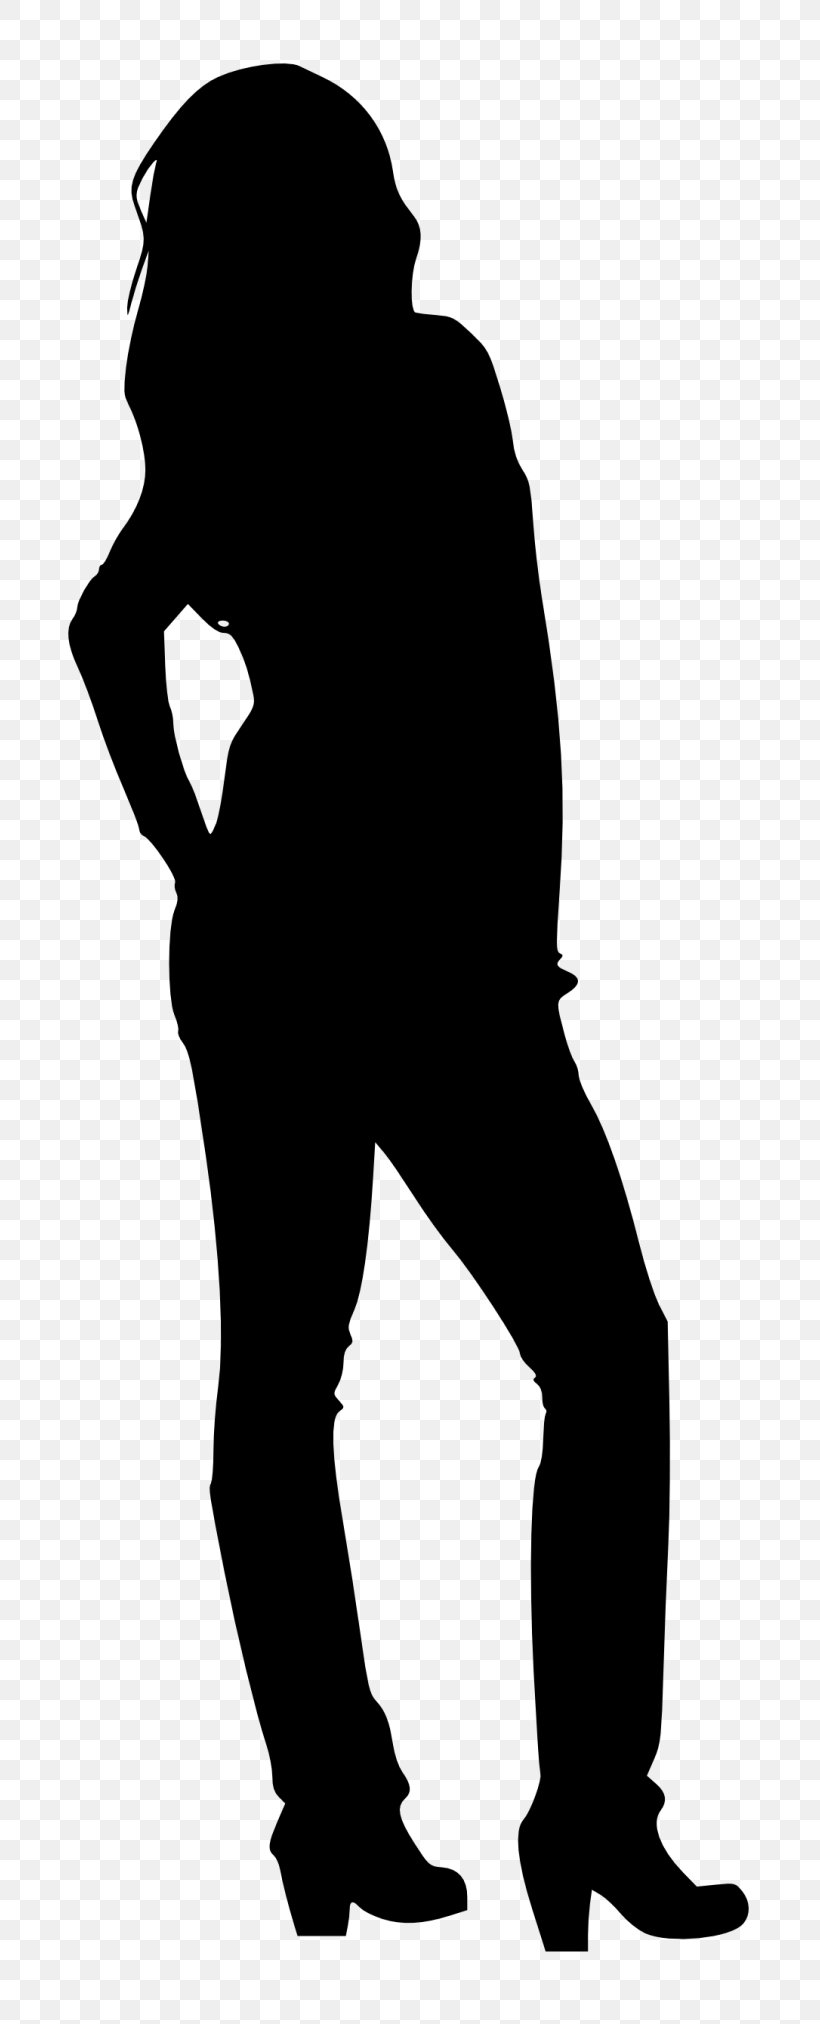 Silhouette Woman Clip Art, PNG, 768x2024px, Silhouette, Black, Black And White, Female, Fictional Character Download Free